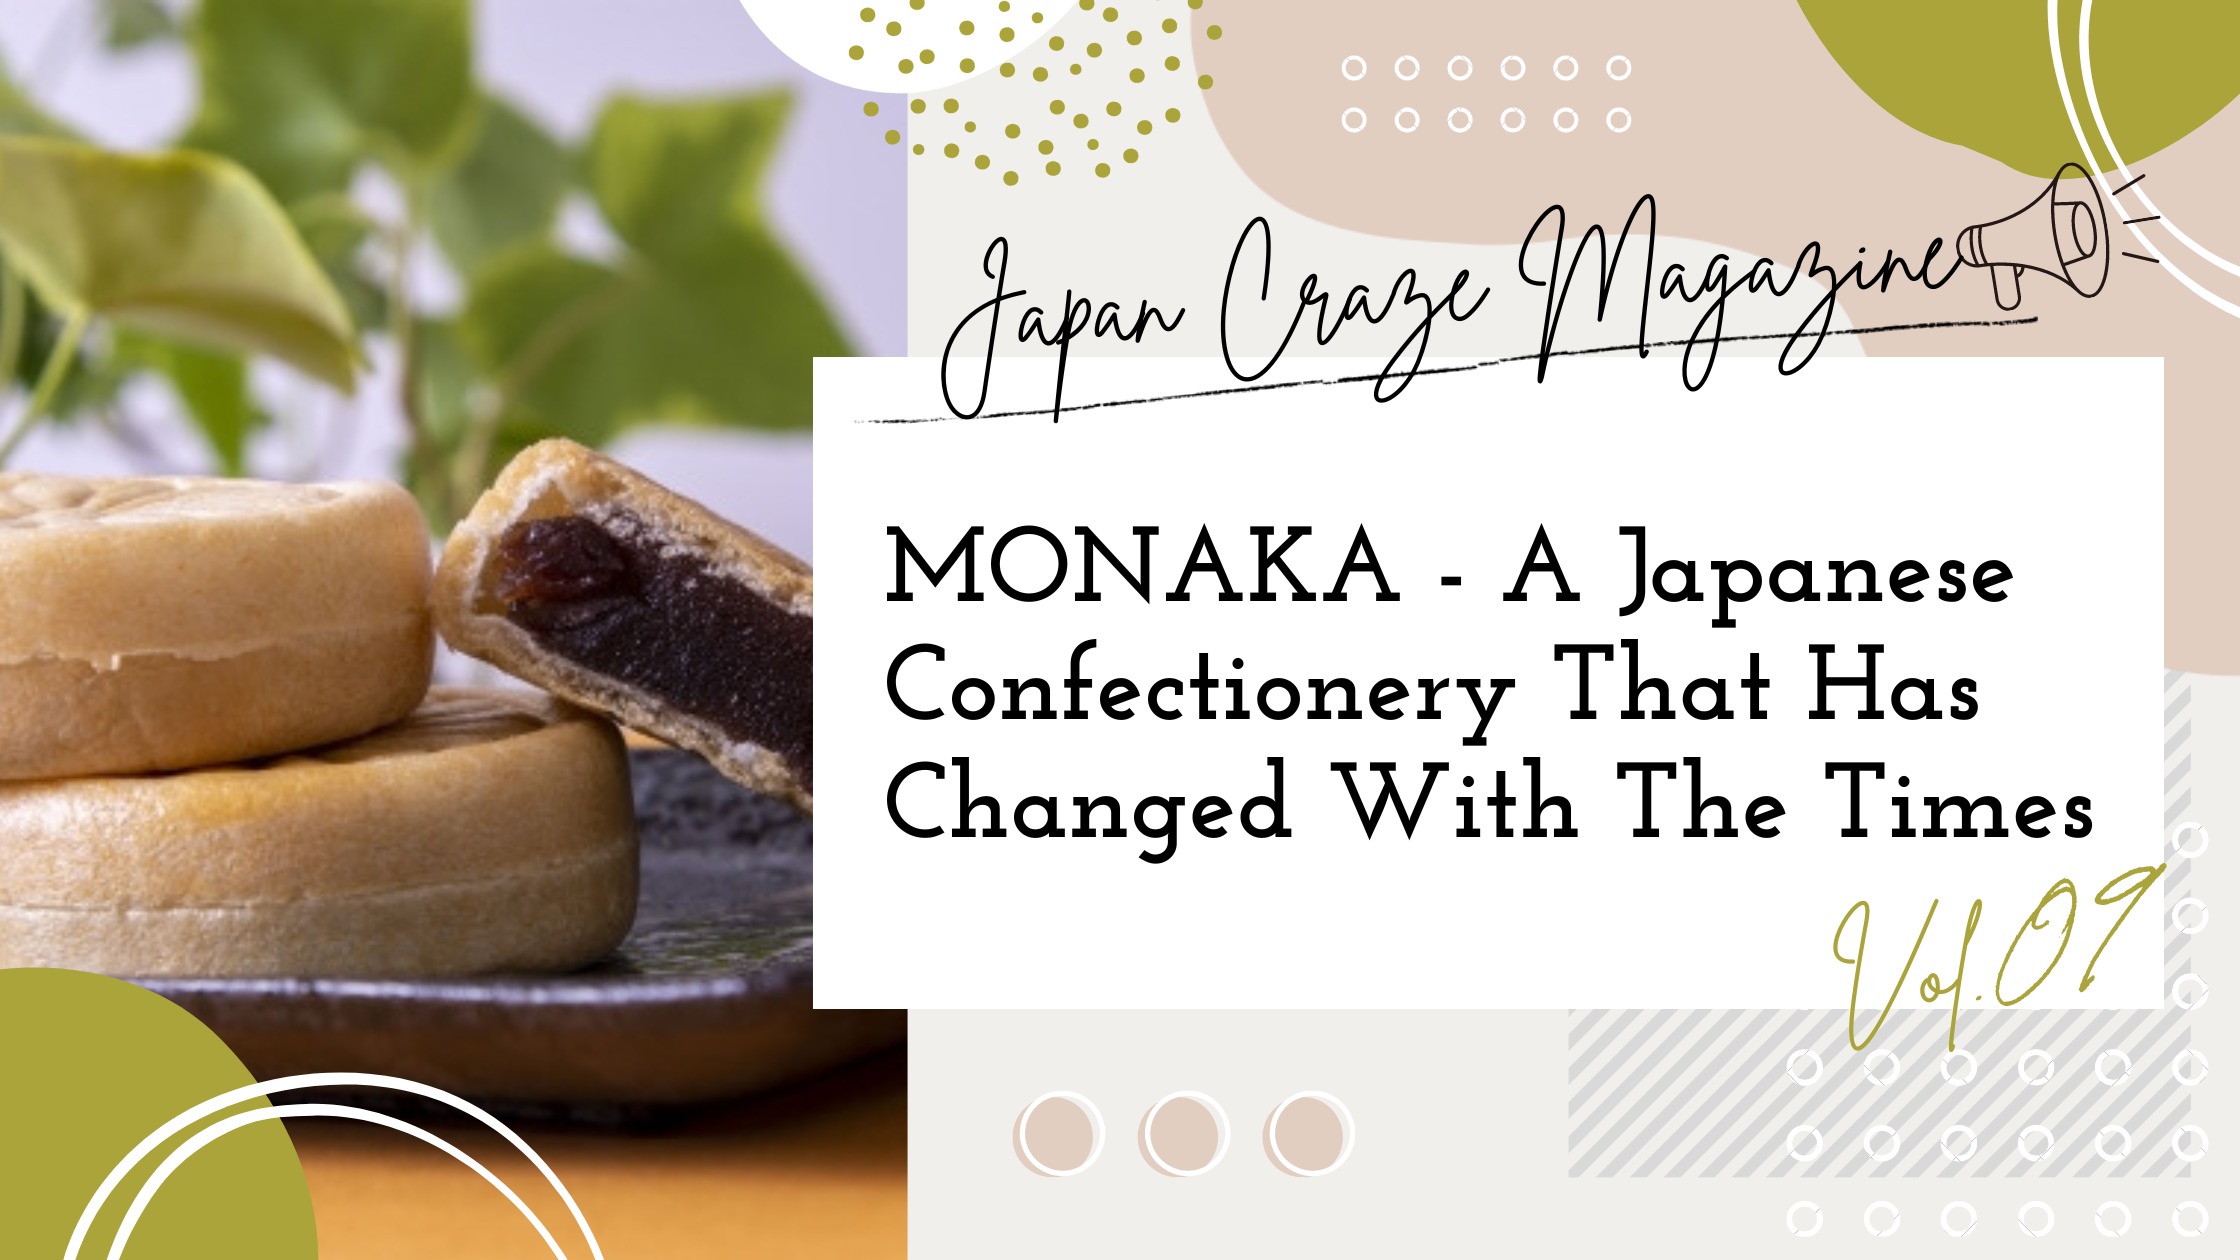 MONAKA (A Japanese confectionery that has changed with the times) - JA